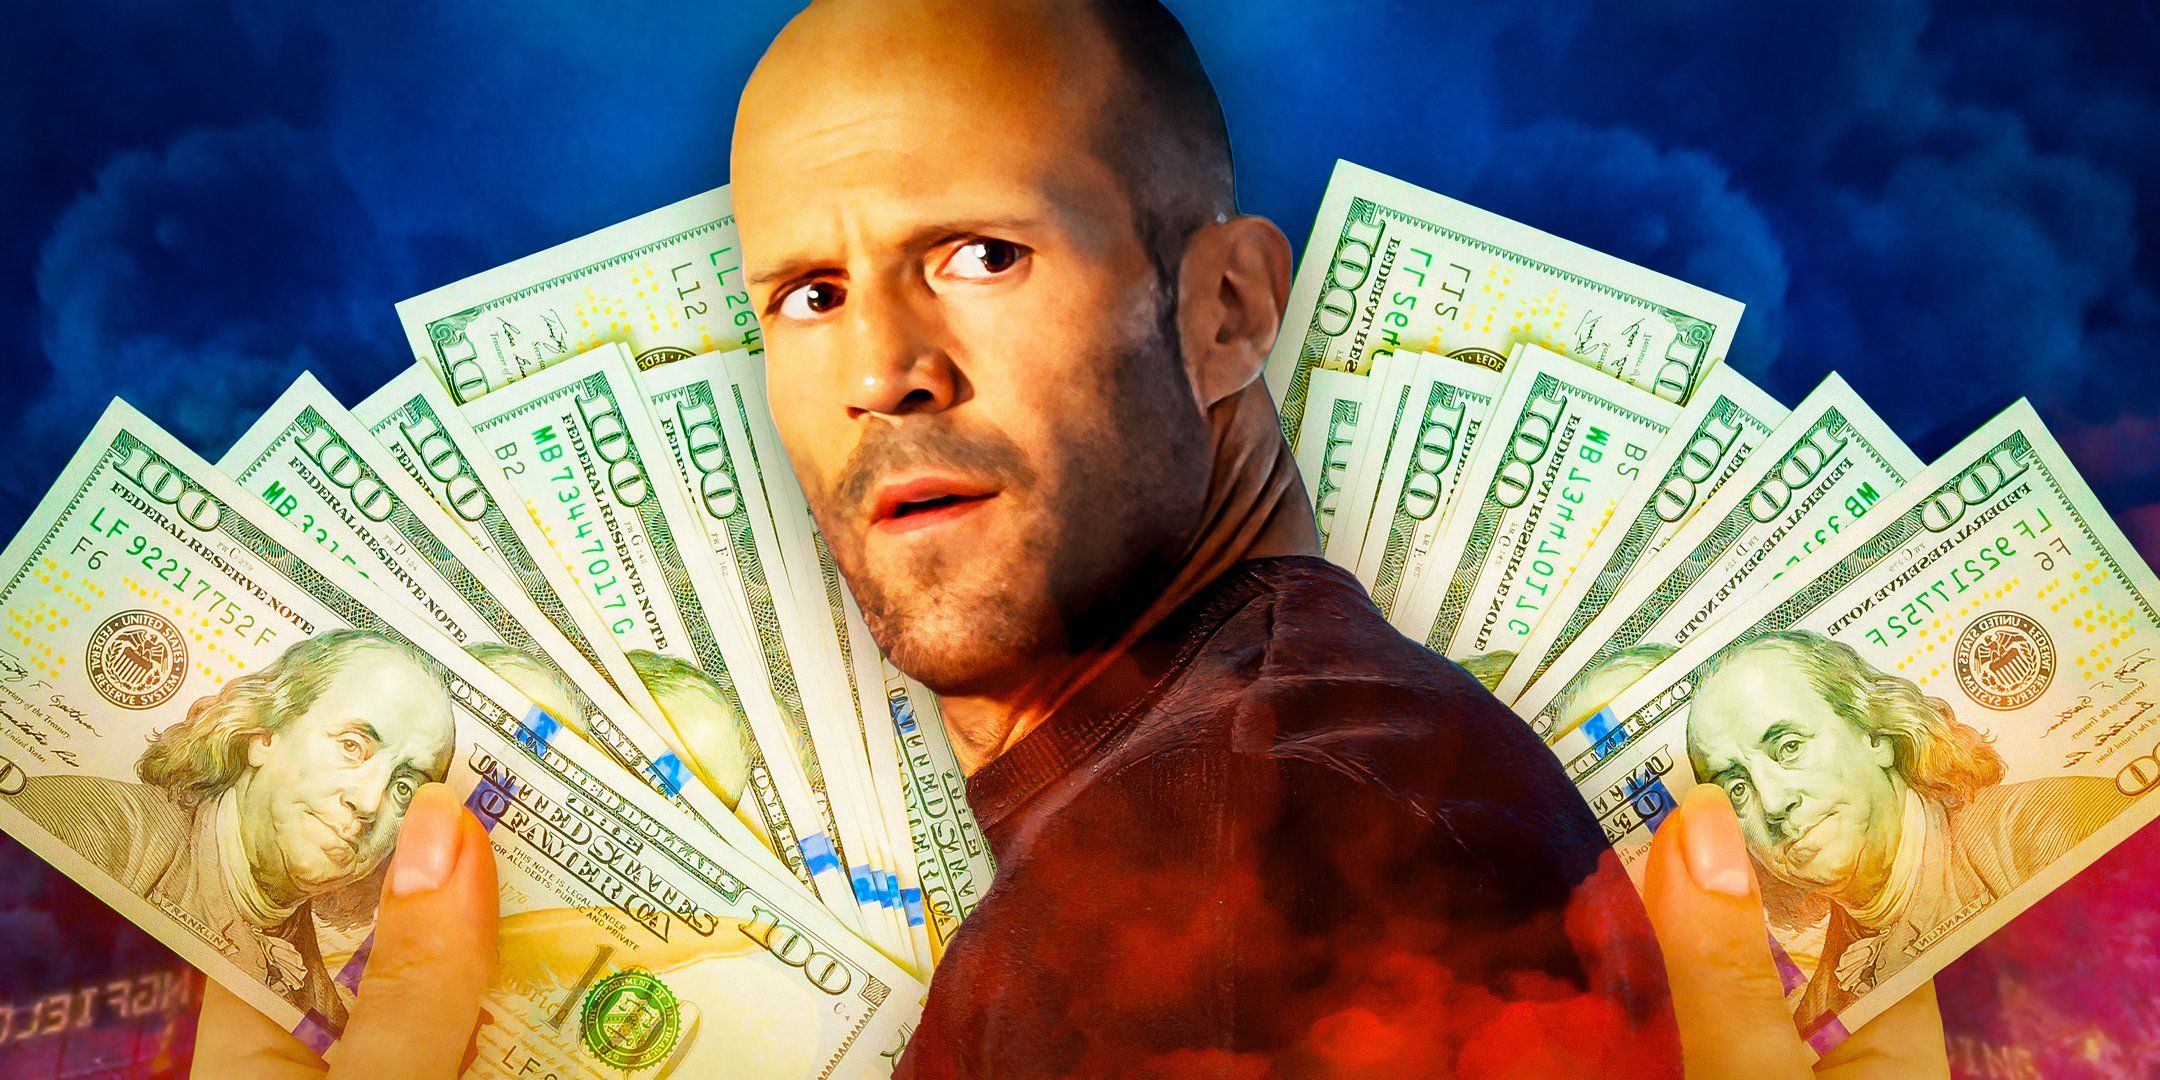 Jason Statham’s 2 million action hit on Amazon Prime makes this upcoming film very exciting